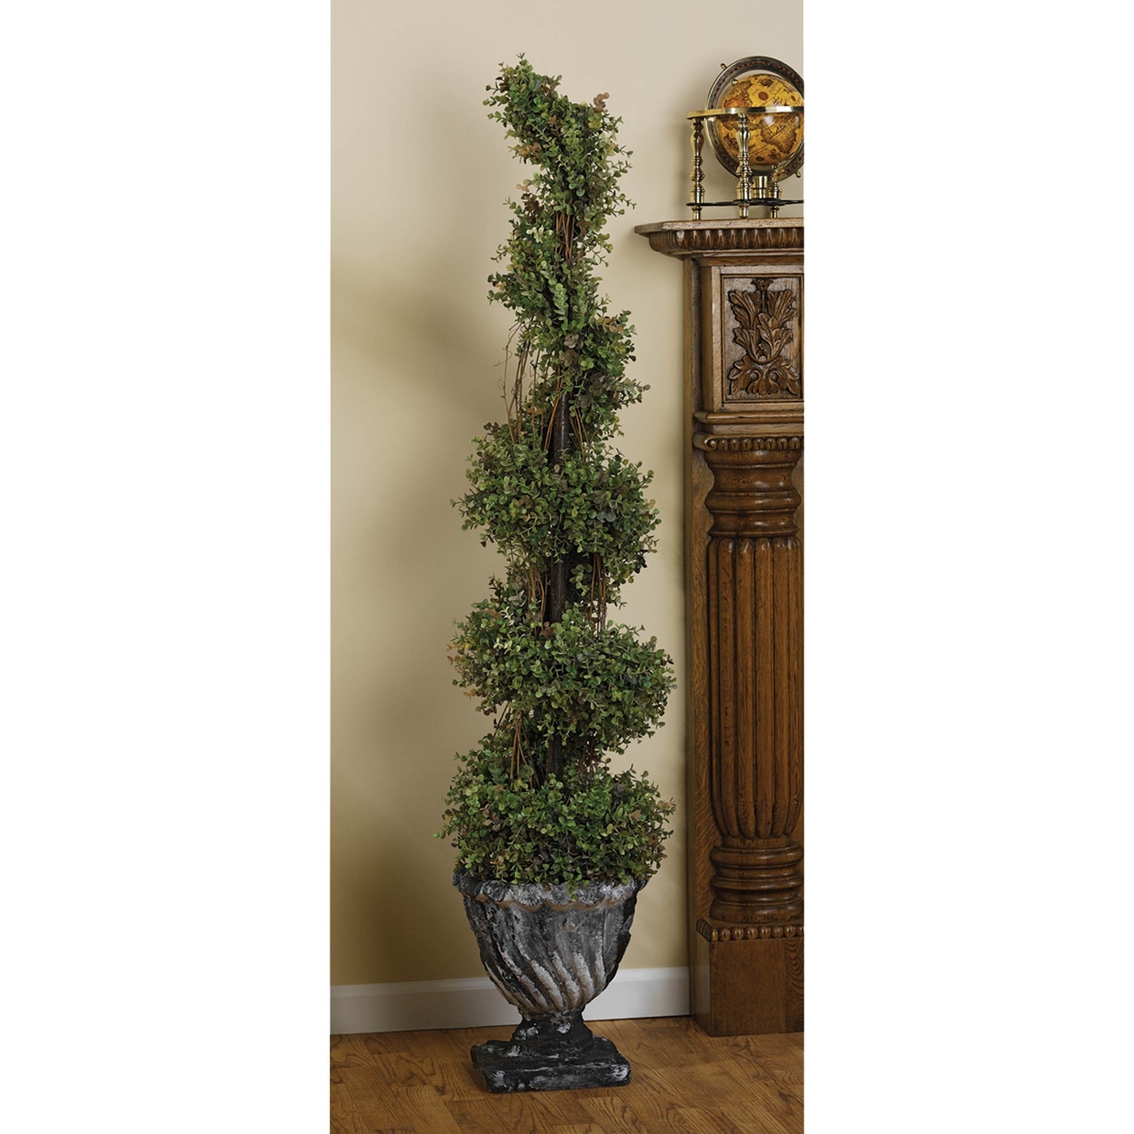 Design Toscano Topiary Tree, Spiral - Image 2 of 3